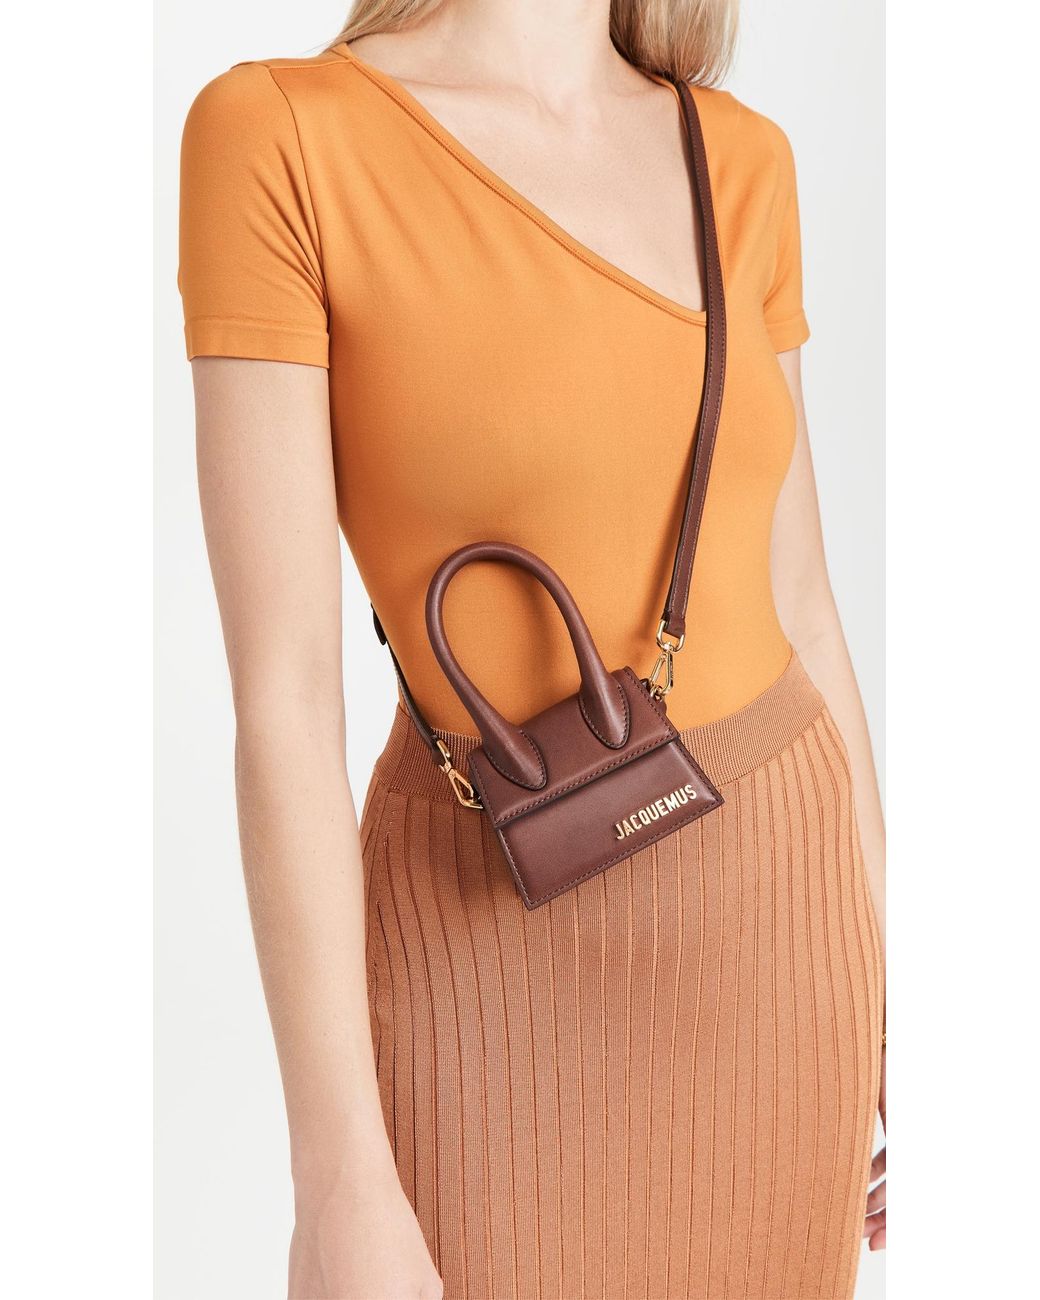 Jacquemus Le Chiquito Bag in Brown